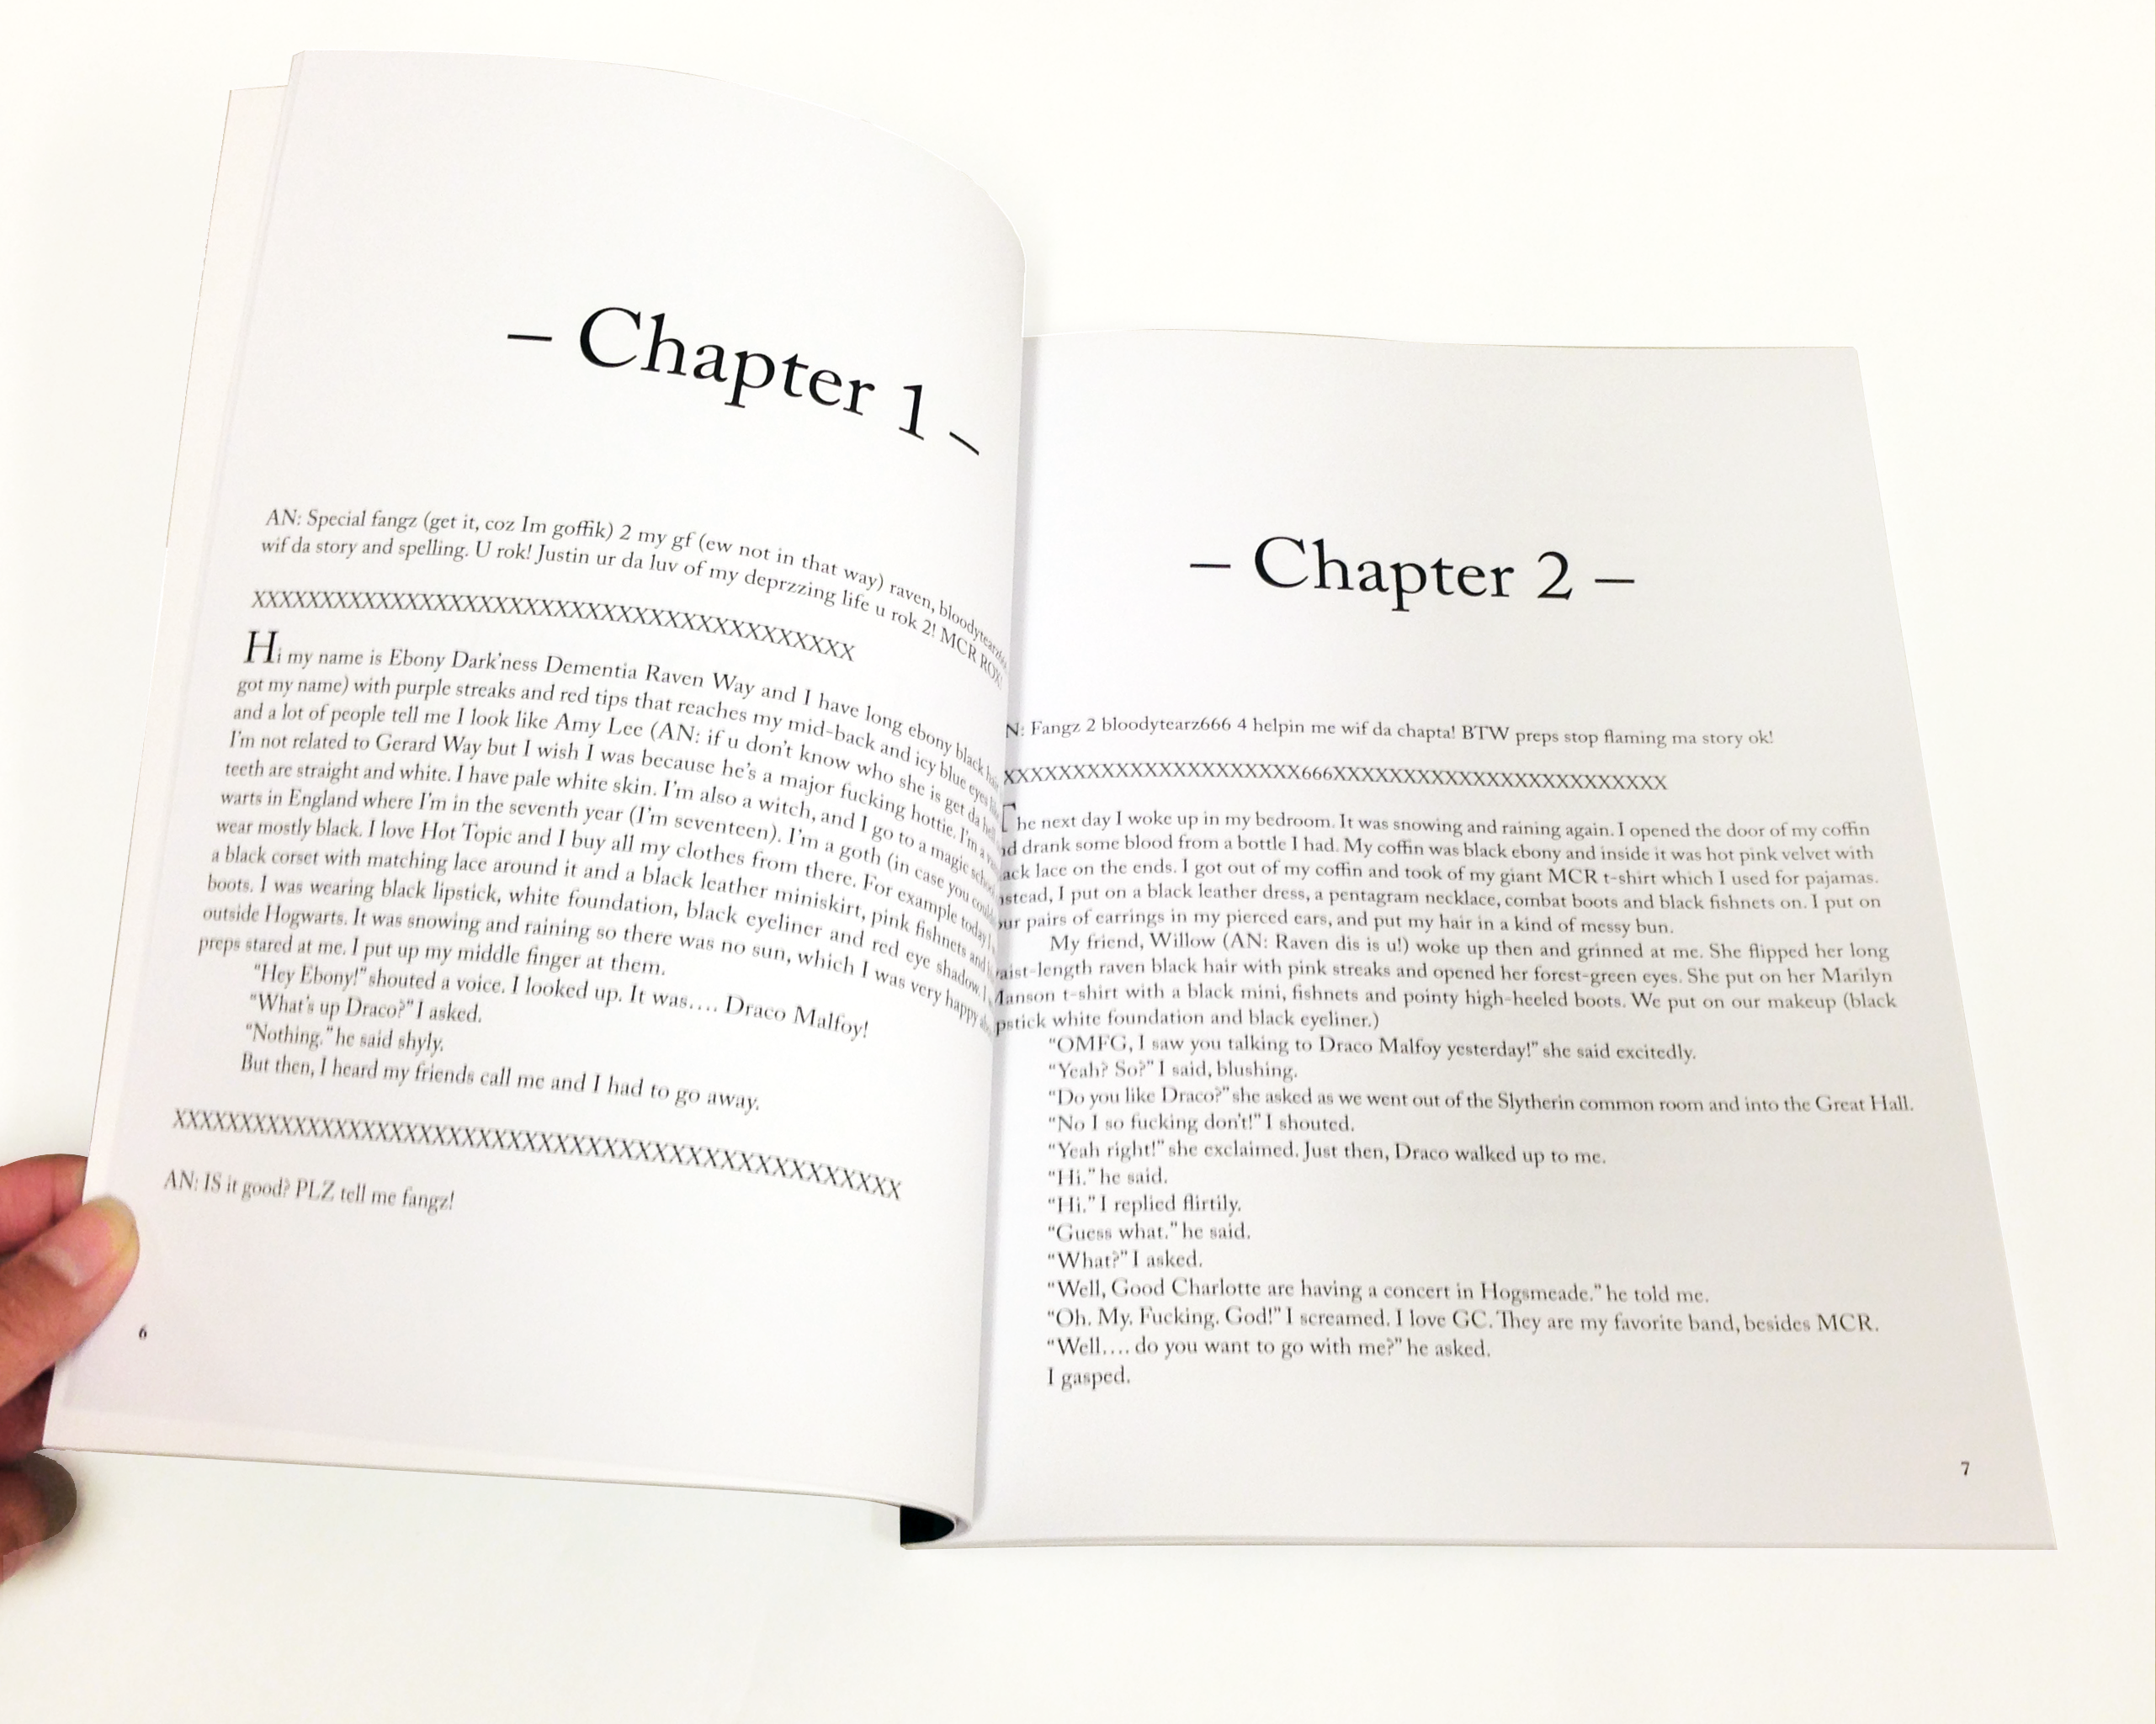 The book is opened to show an interior spread of Chapters 1 and 2 respectively.